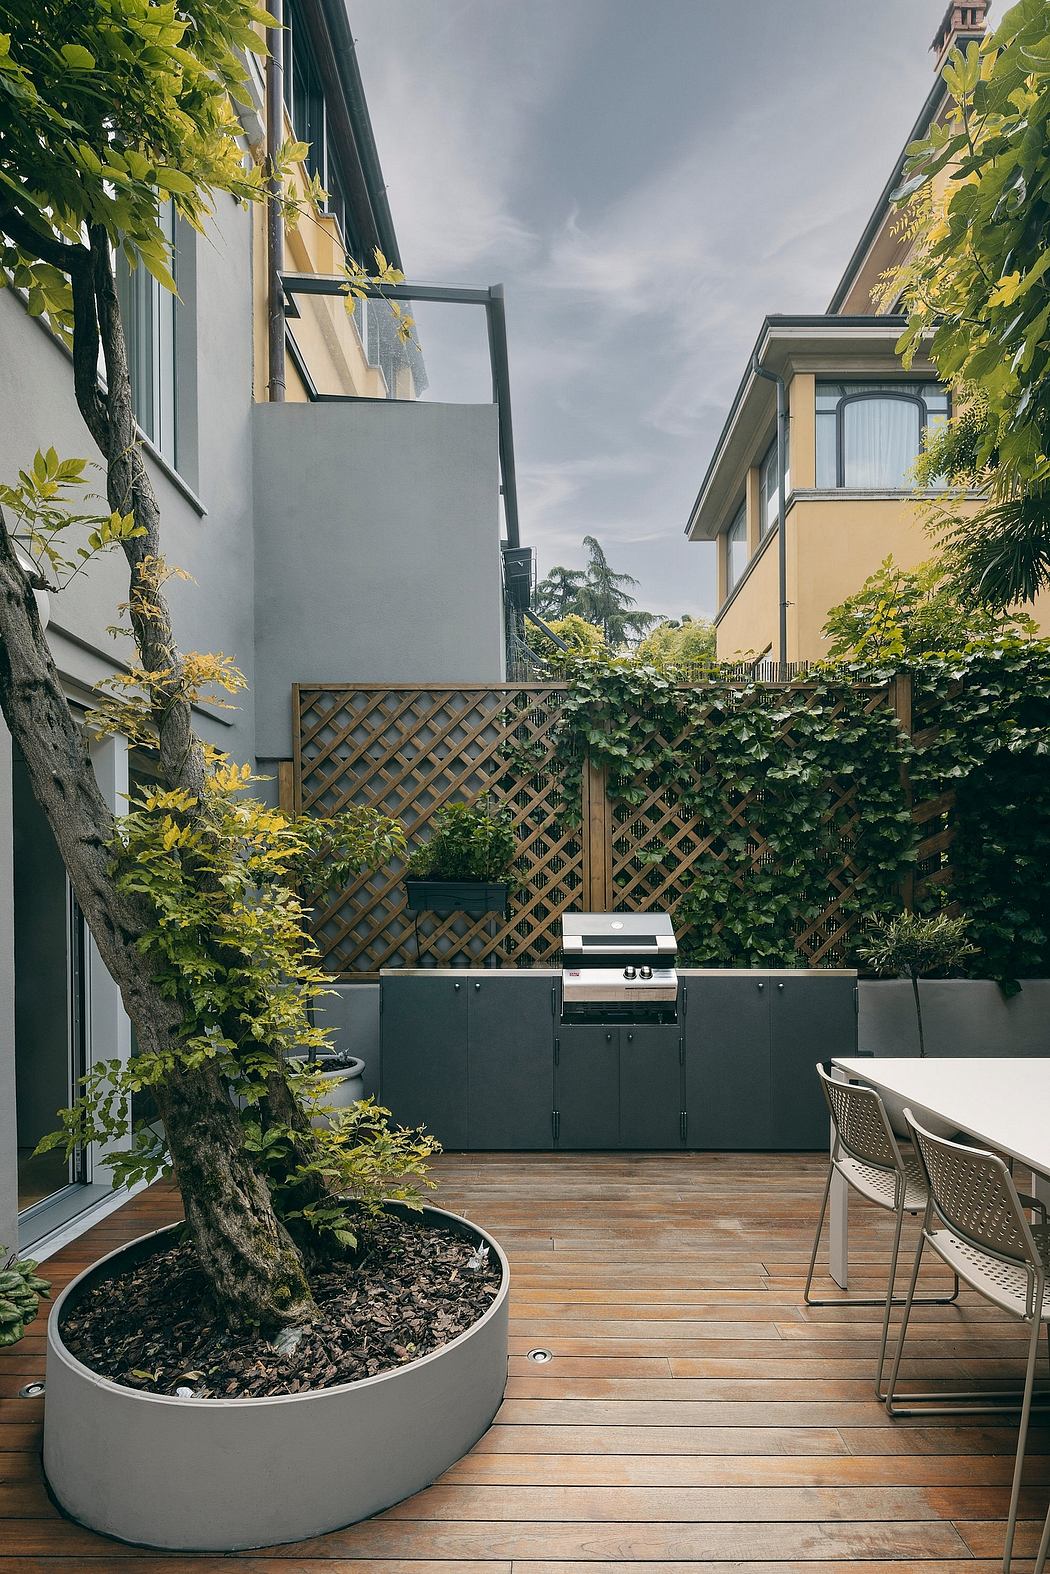 Contemporary courtyard with wood decking, potted tree, and outdoor dining setup.